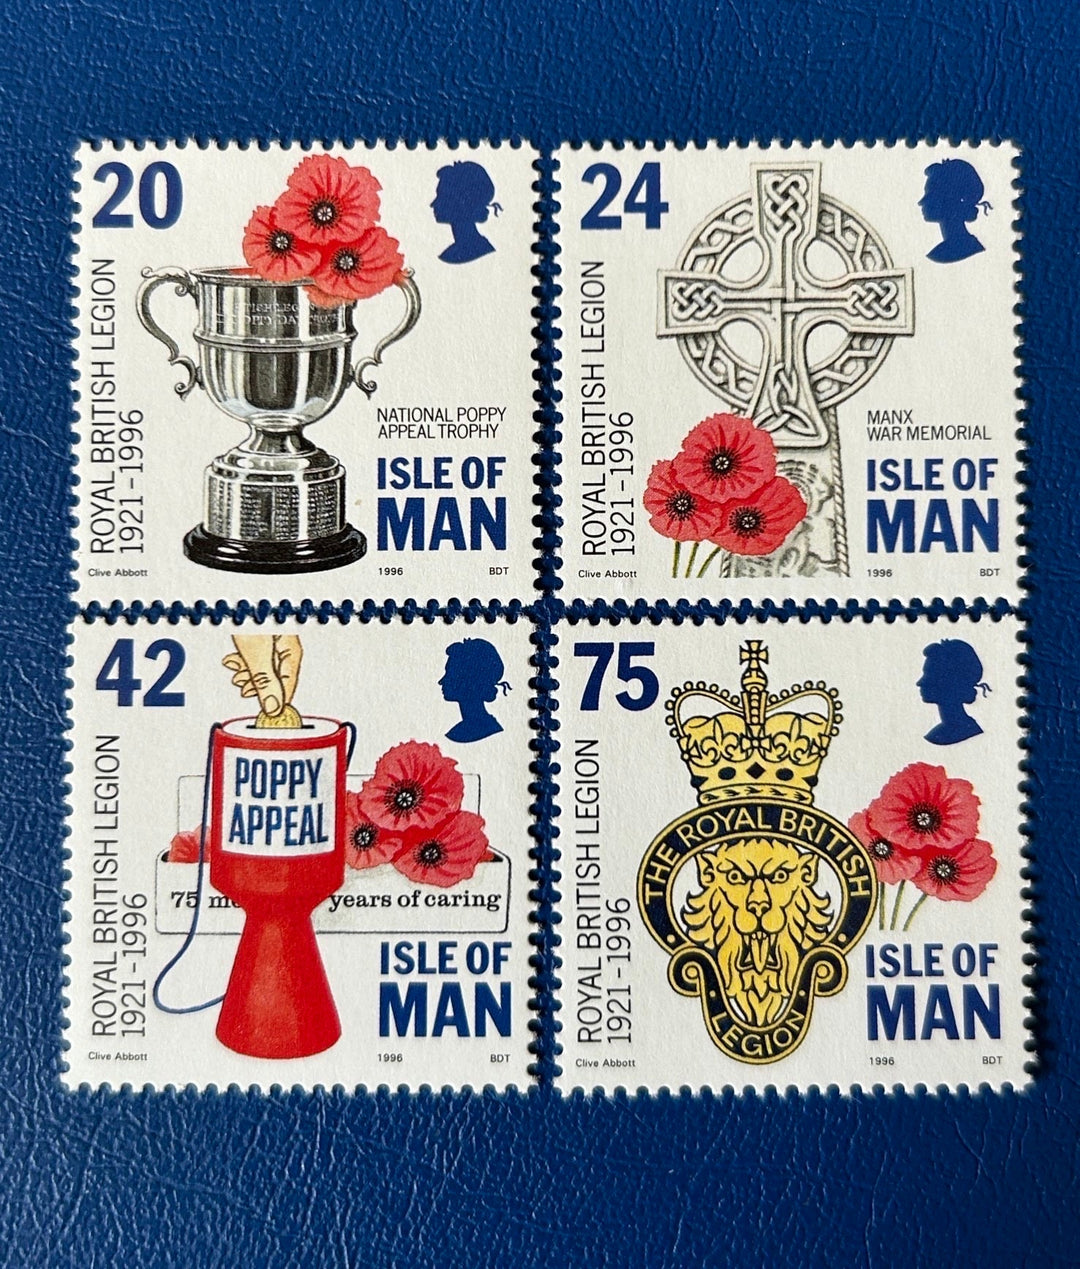 Isle of Man - Original Vintage Postage Stamps - 1996 - 25th Anniversary Royal Legion - for the collector, artist or crafter